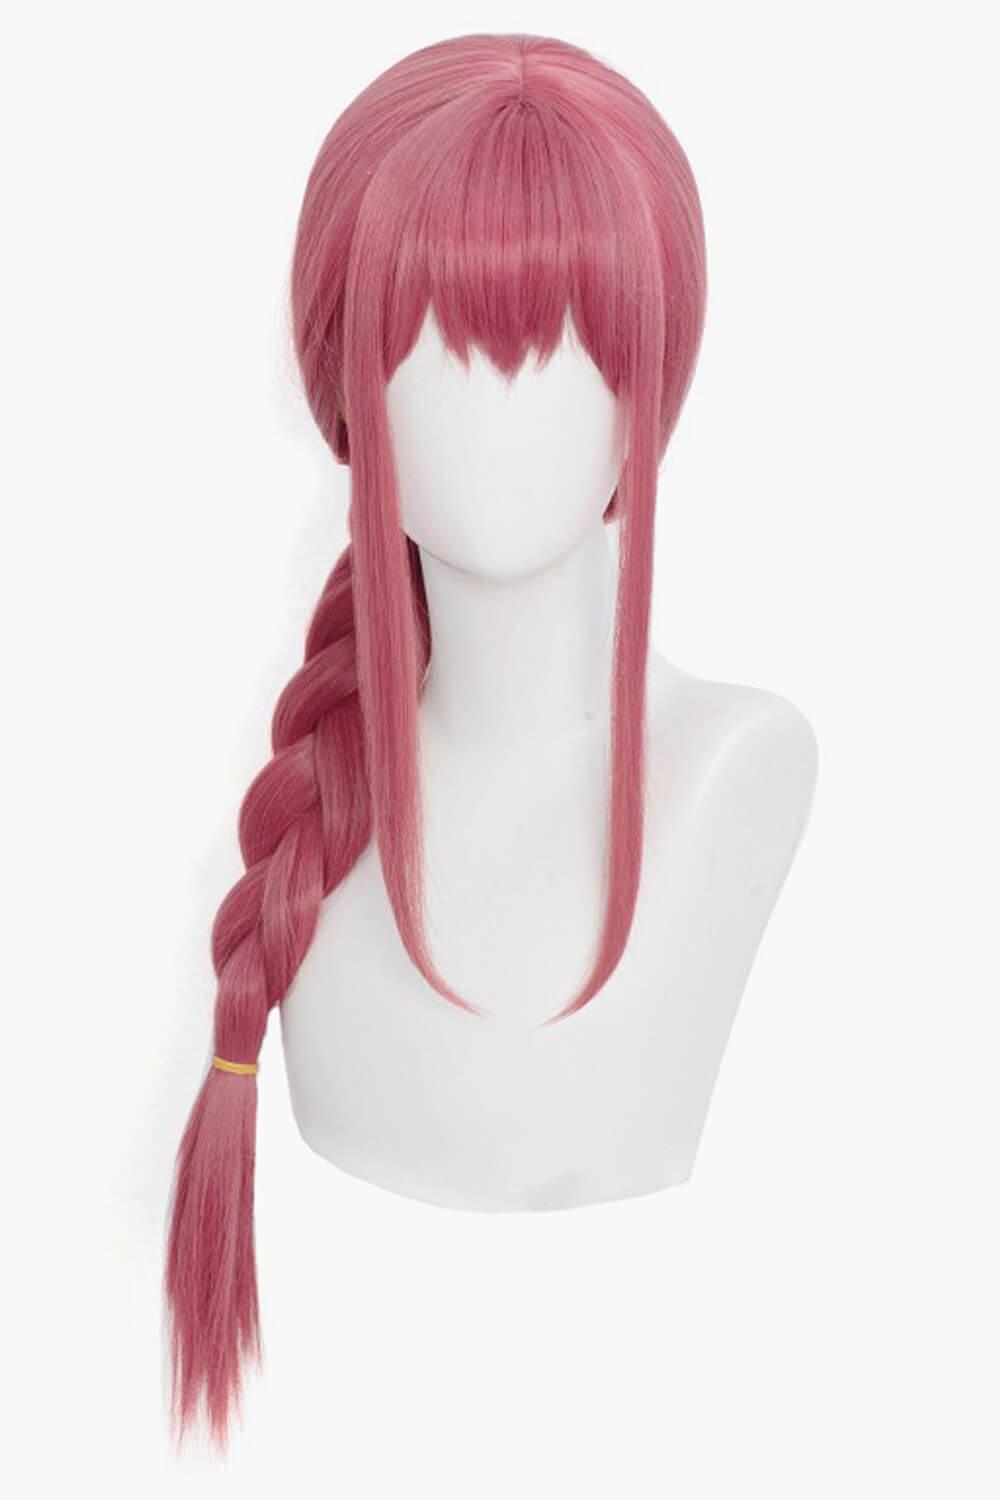 Chainsaw Man Makima Pink Braid Wig - Aesthetic Clothes Shop